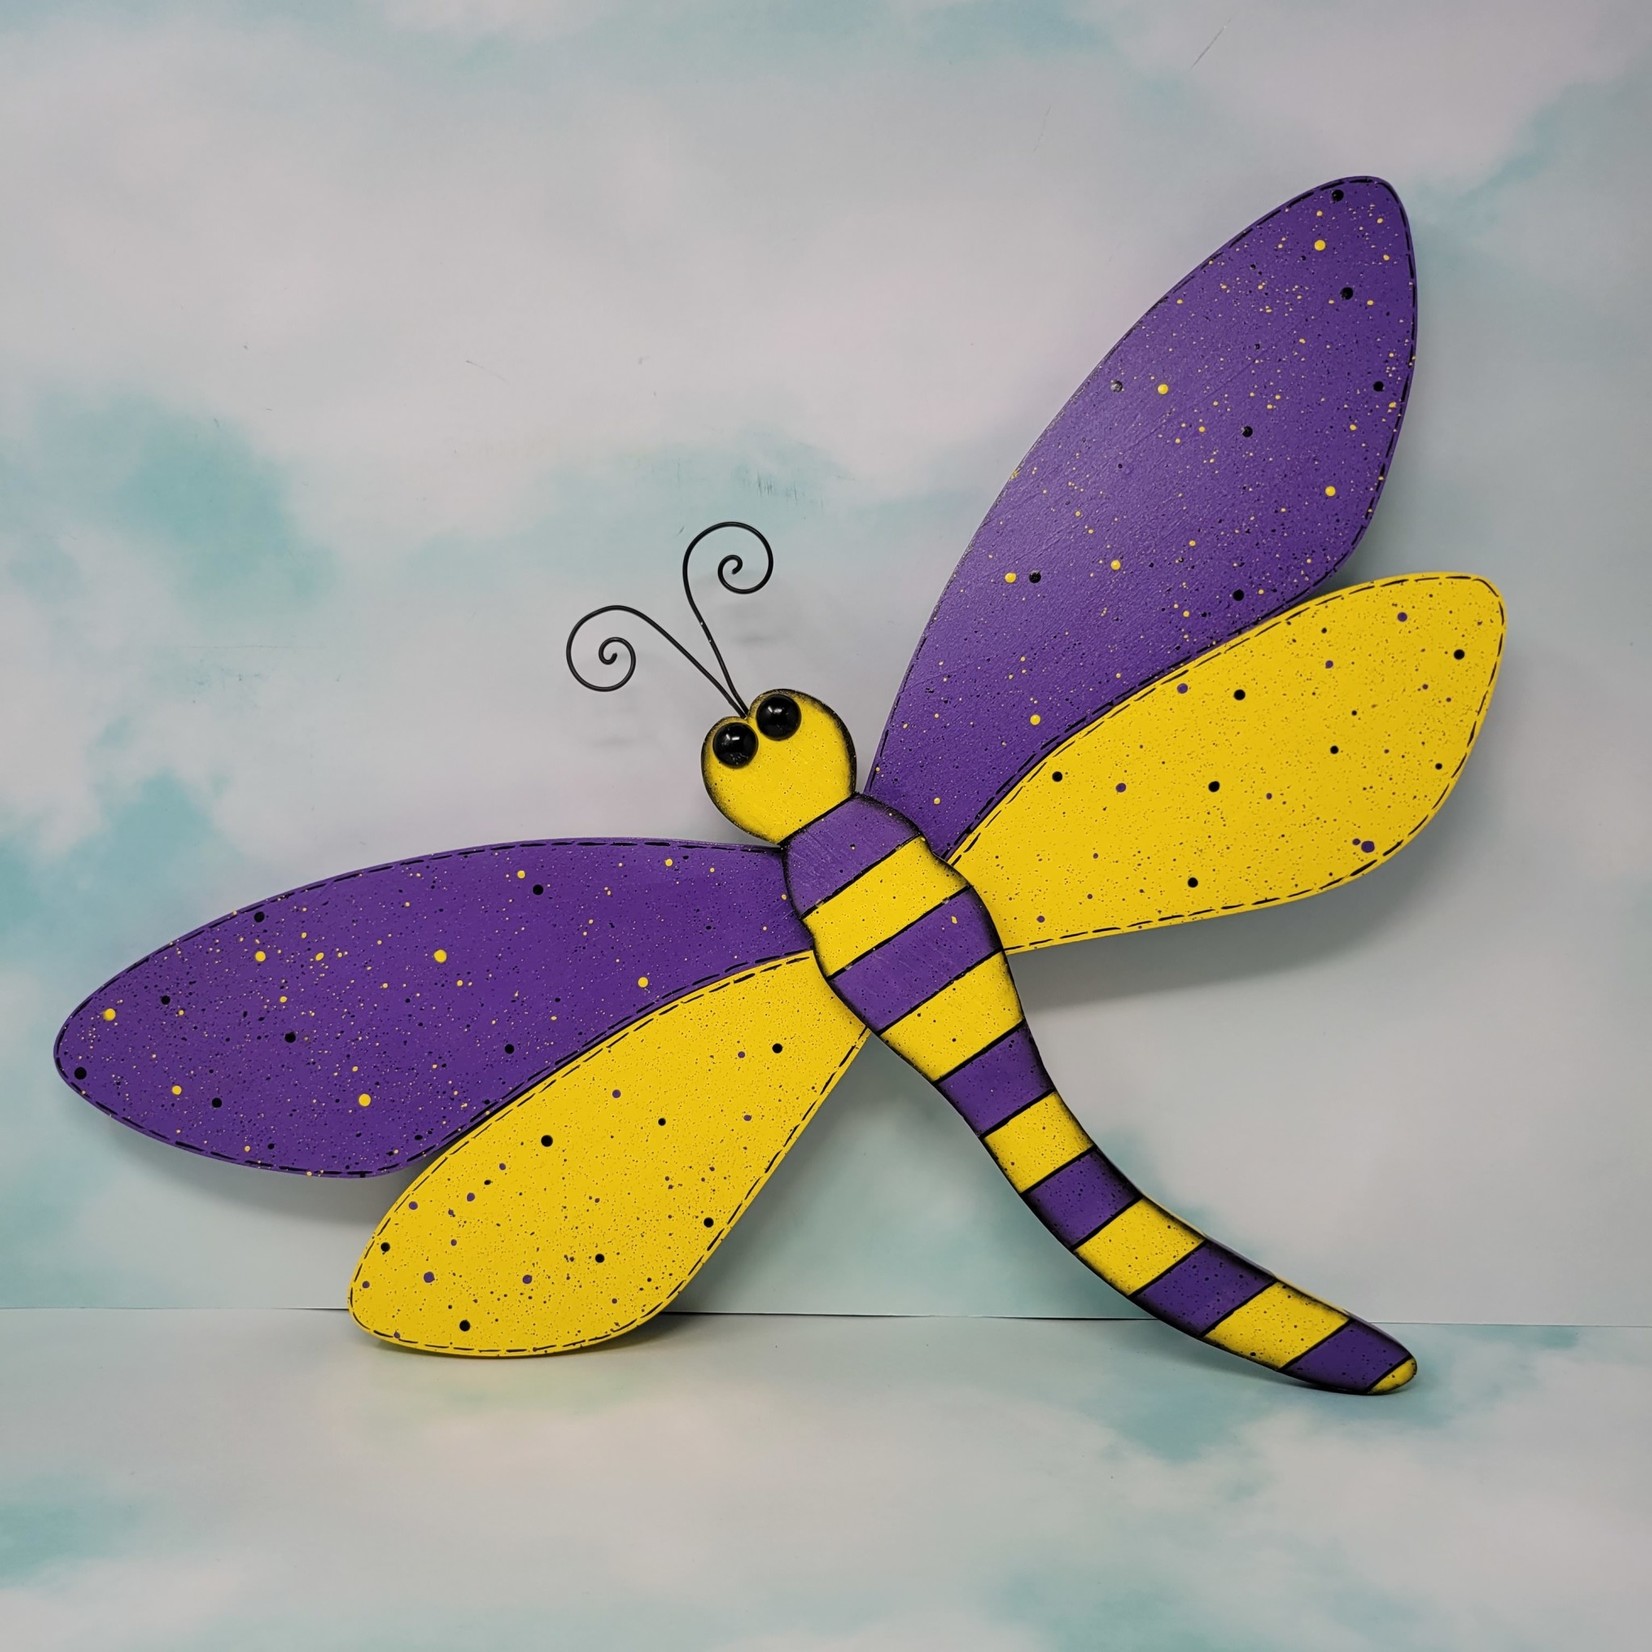 Sharon's Large Wooden Dragonfly